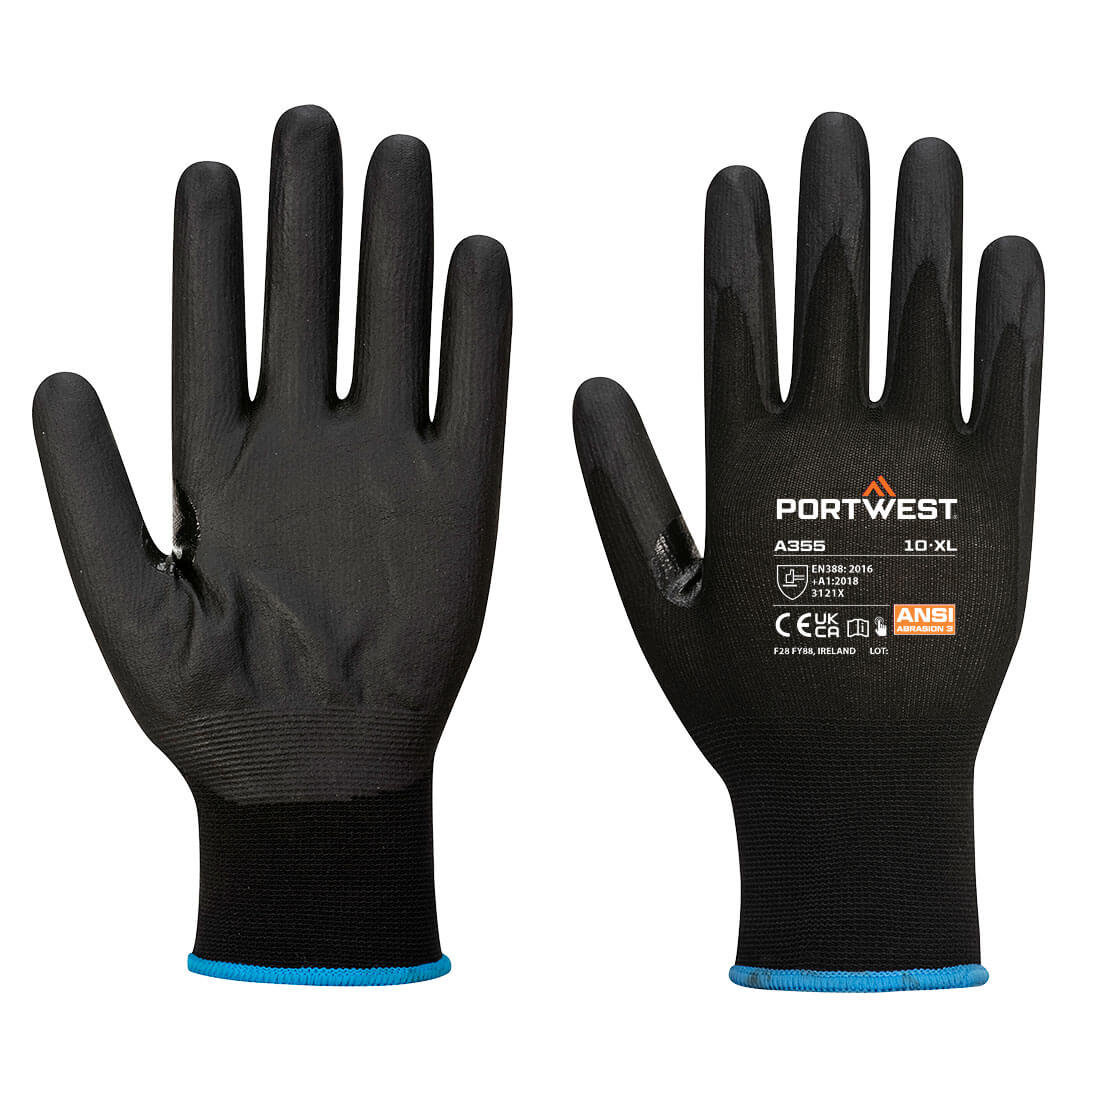 A355 Portwest® Nitrile Foam Coated A1 Touchscreen Grippy Work Gloves